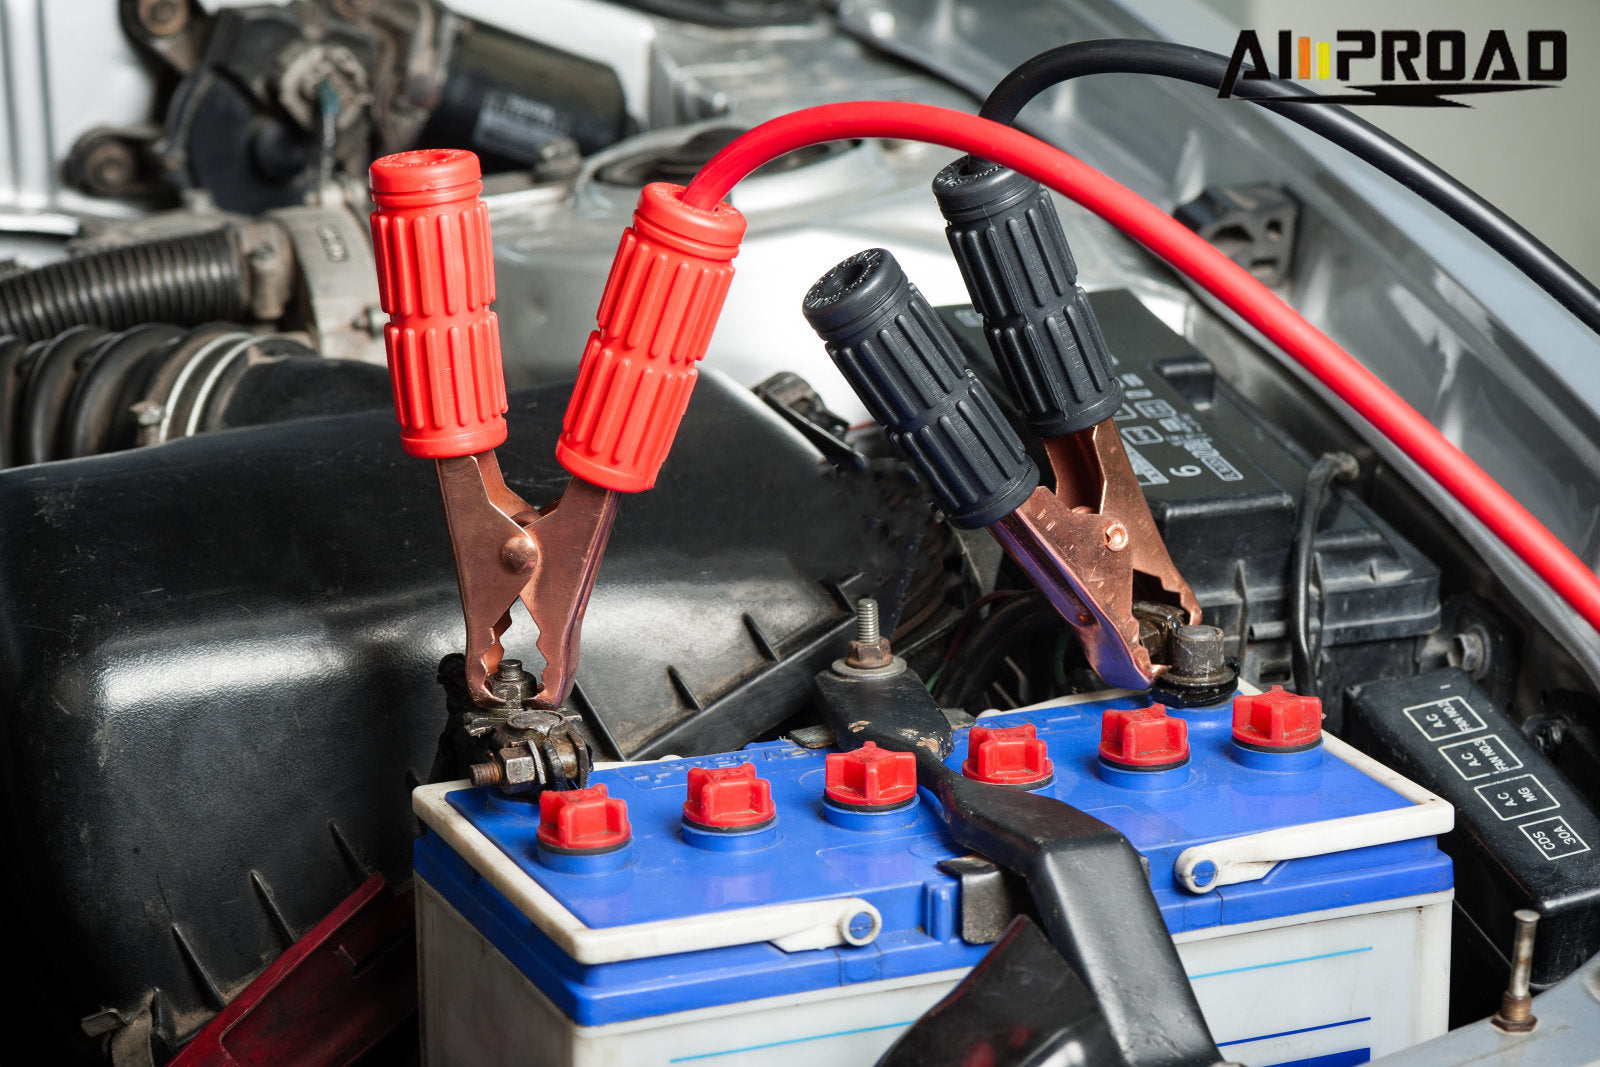 How can a car jump starter battery output such a large amount of current?